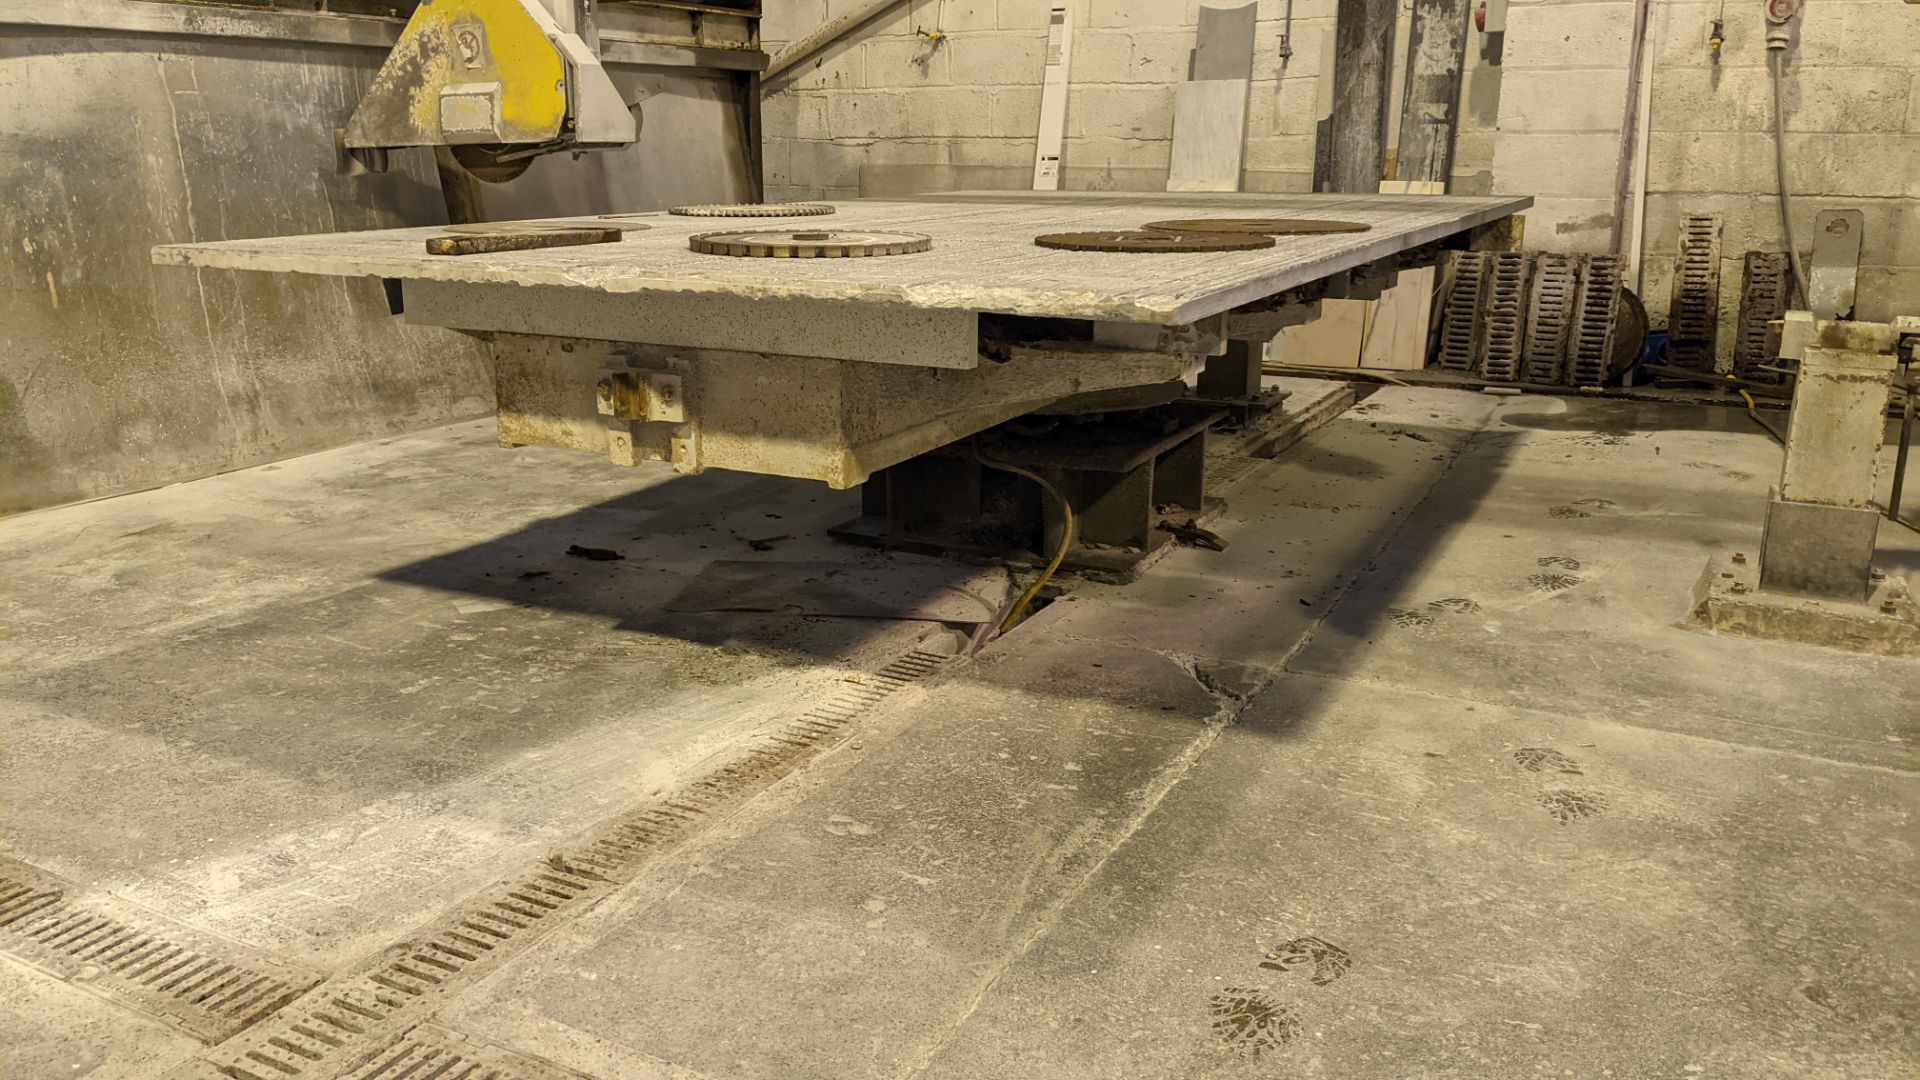 1999 Marmo Gravellona Eura 35 bridge saw with laser line, serial no. 617. Includes controller, quant - Image 18 of 18